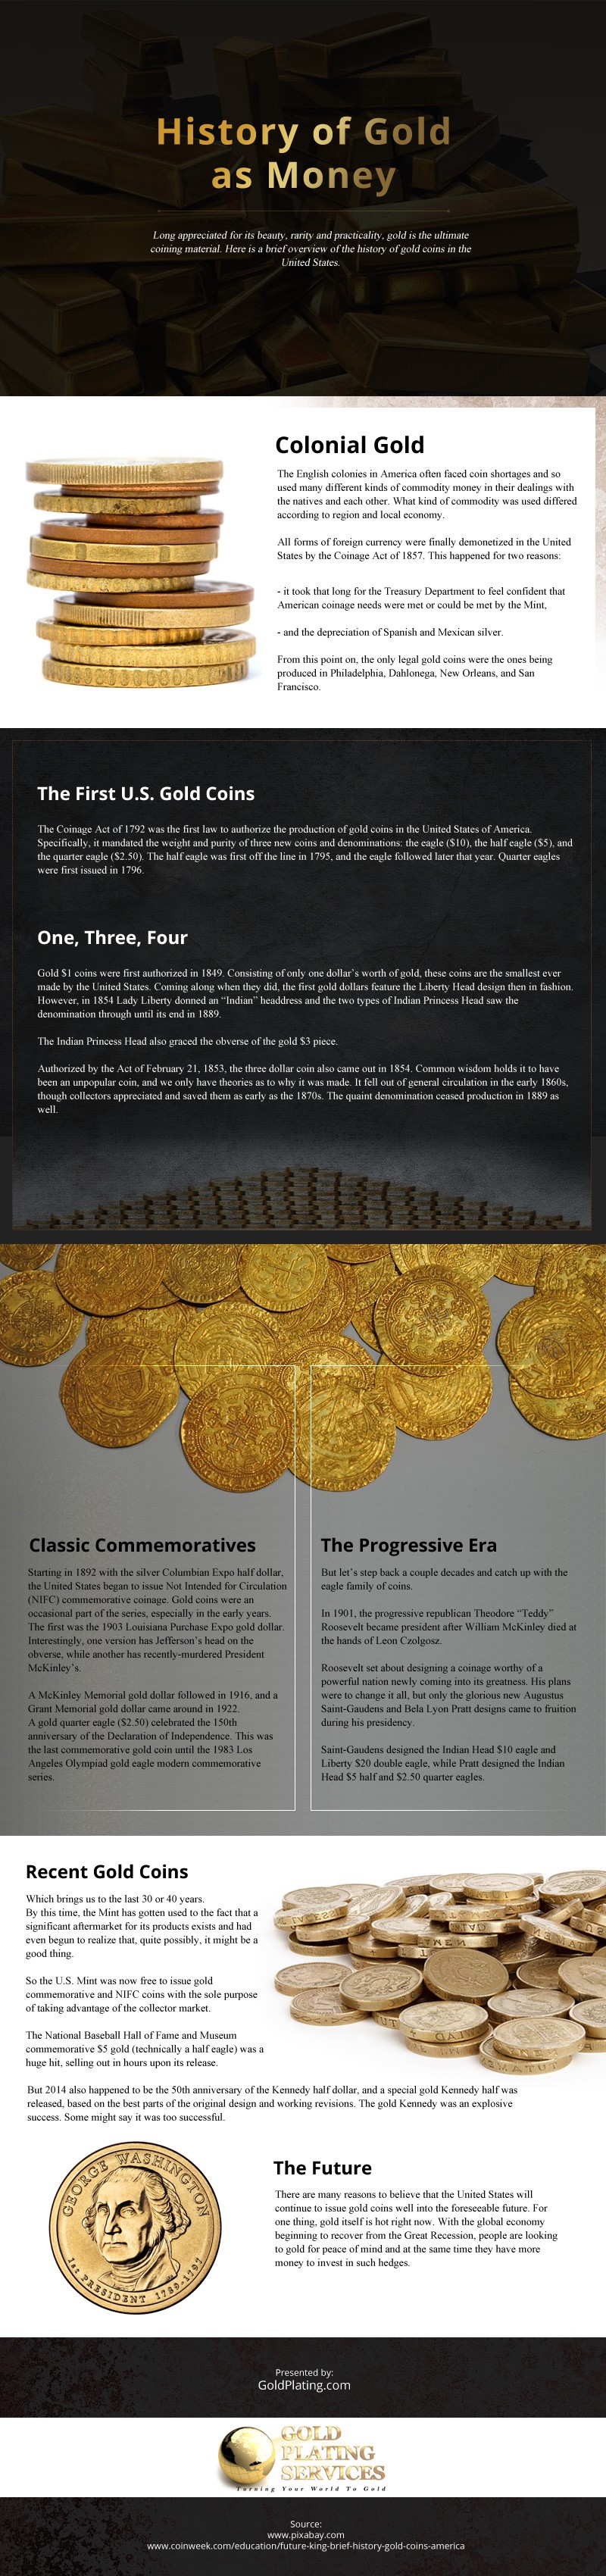 History of Gold as Money Infographic